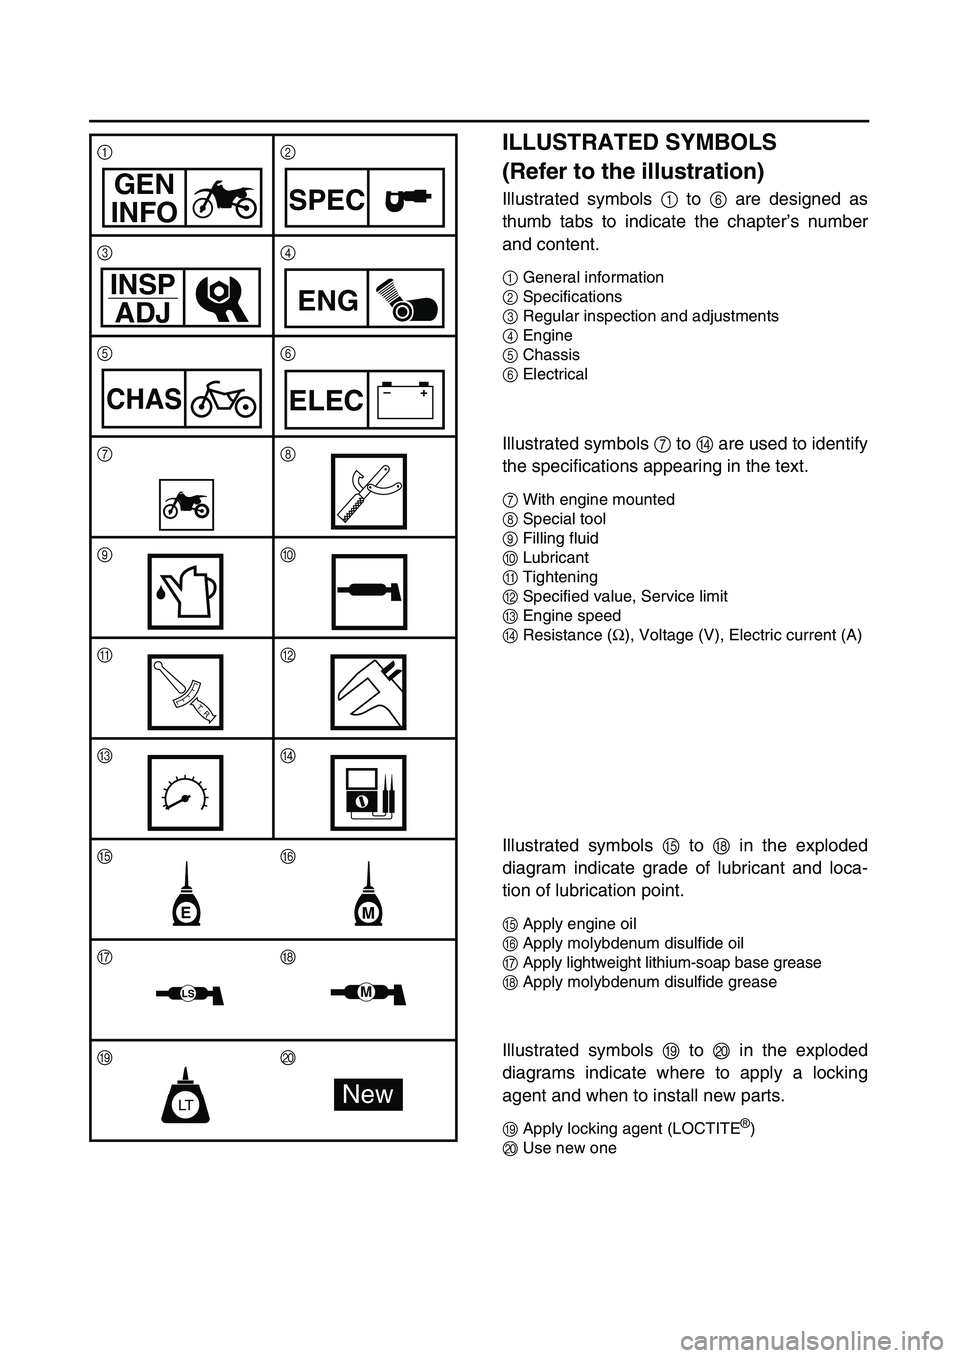 YAMAHA TTR90 2005  Owners Manual  
ILLUSTRATED SYMBOLS 
(Refer to the illustration) 
Illustrated symbols  
1  
 to   
6  
 are designed as
thumb tabs to indicate the chapter’s number
and content. 
1 
General information 
2 
Specifi